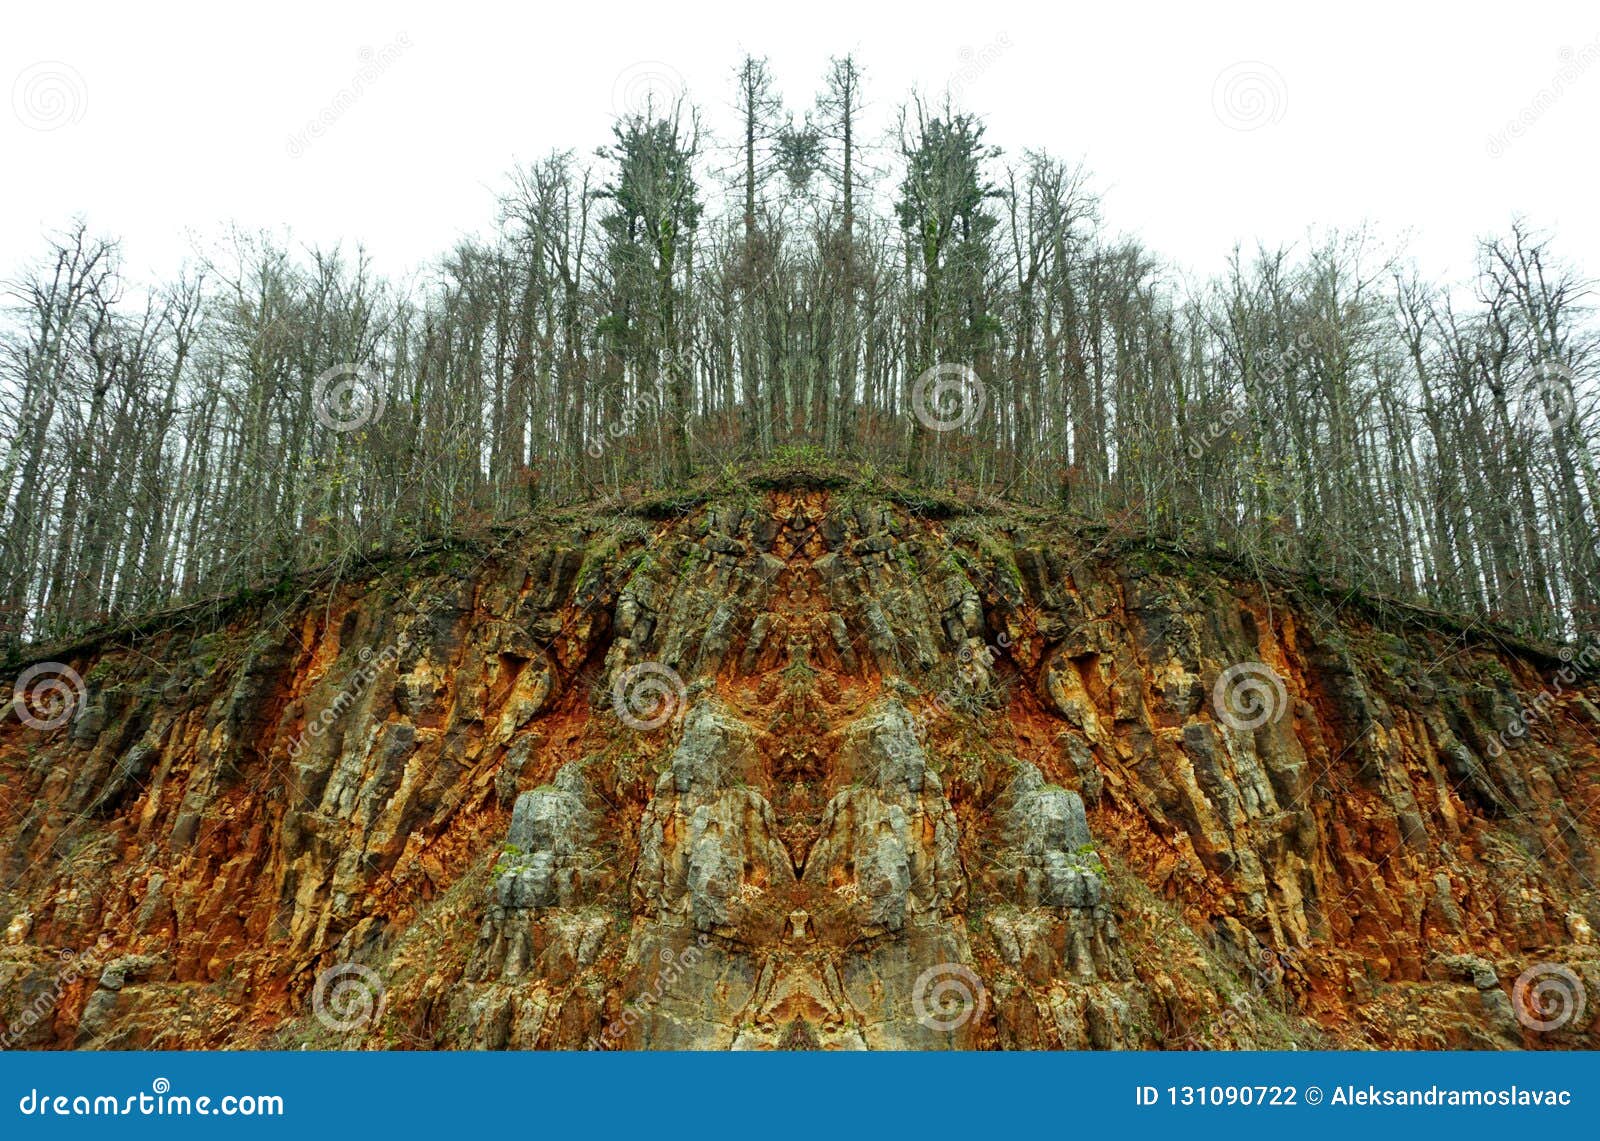 amme Kiks Pidgin Pollution of Nature and Consequence. Abstract View of Sick Tree in Diseased  Forest after Acid Rain Stock Photo - Image of disease, bark: 131090722